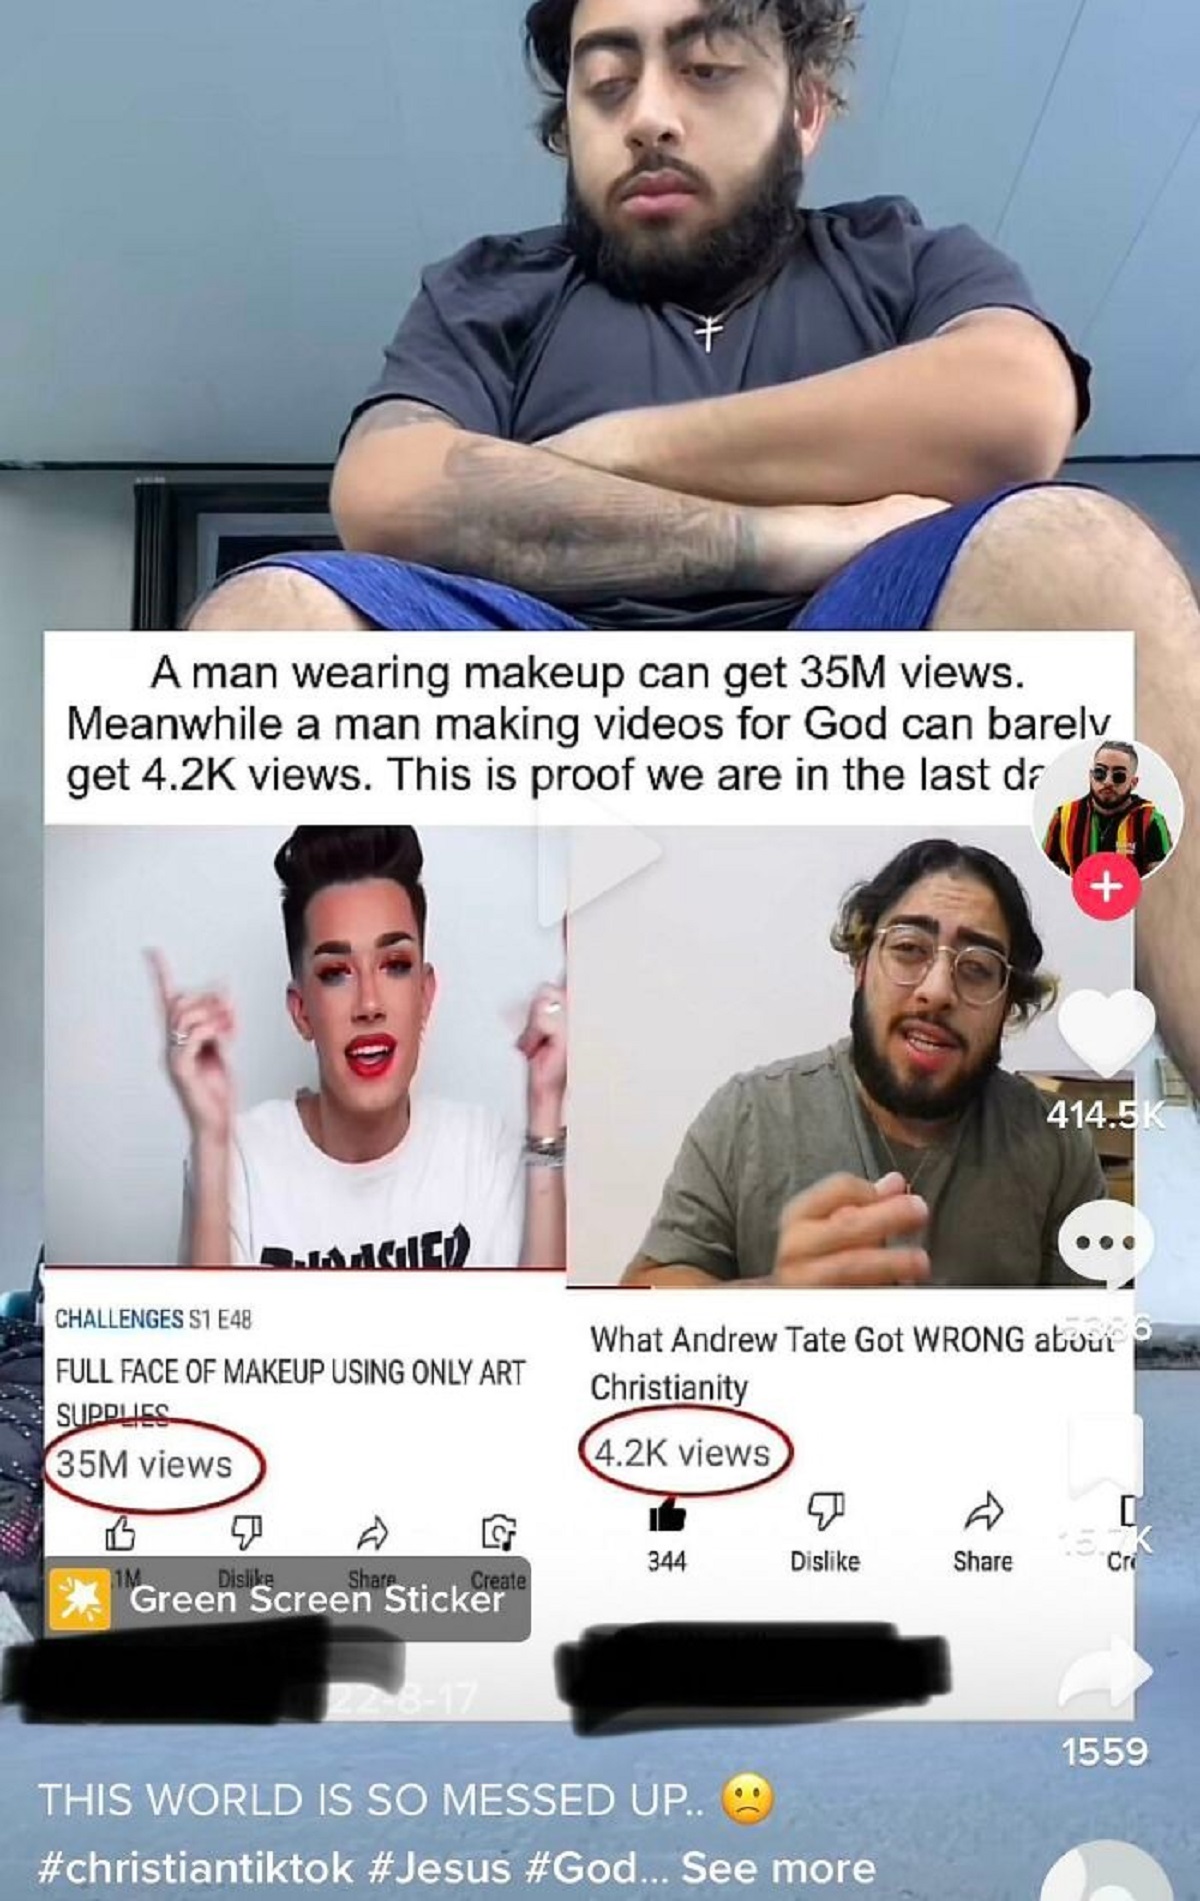 cringe pics - beard - A man wearing makeup can get 35M views. Meanwhile a man making videos for God can barely get views. This is proof we are in the last dr Co Challengeste Full Face Of Makeup Using Only Art Subclies 35M views 15 Green Screen Sticker Wha